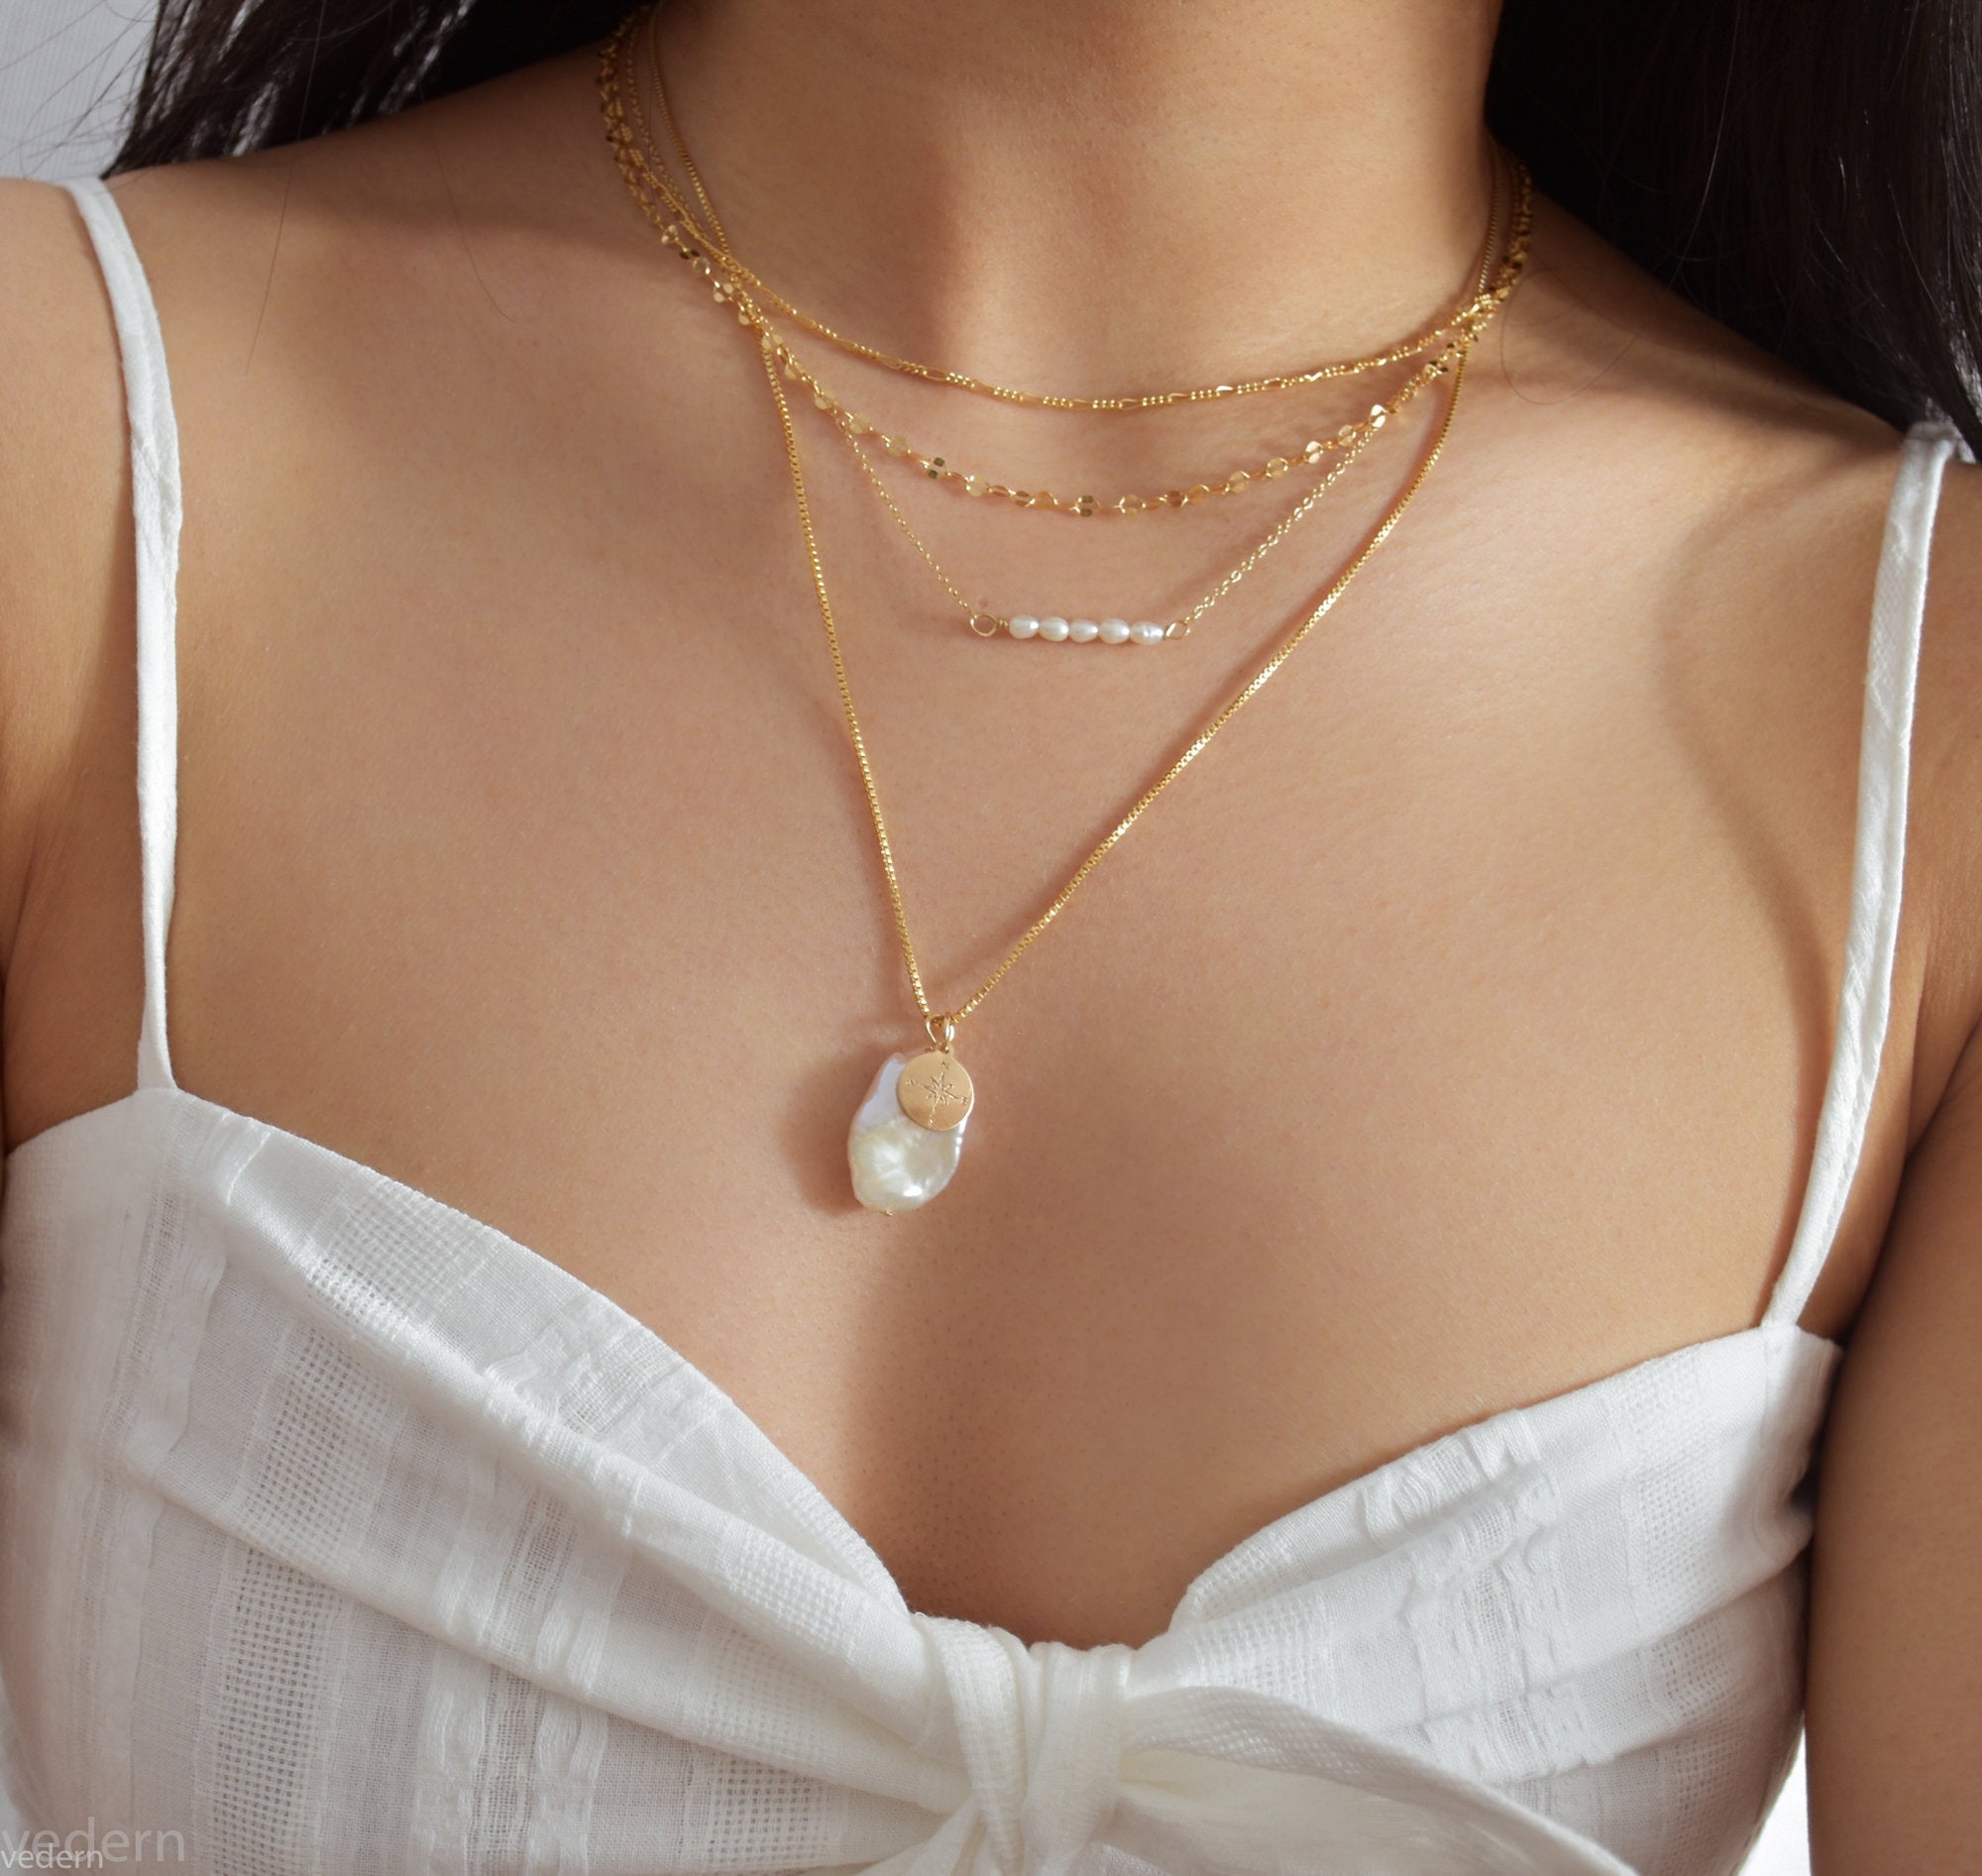 Pearl Compass Necklace - Gold Compass Necklace, Compass Necklace, Pearl Necklace, Single Pearl Necklace, Real Pearl Necklace |GFN00050